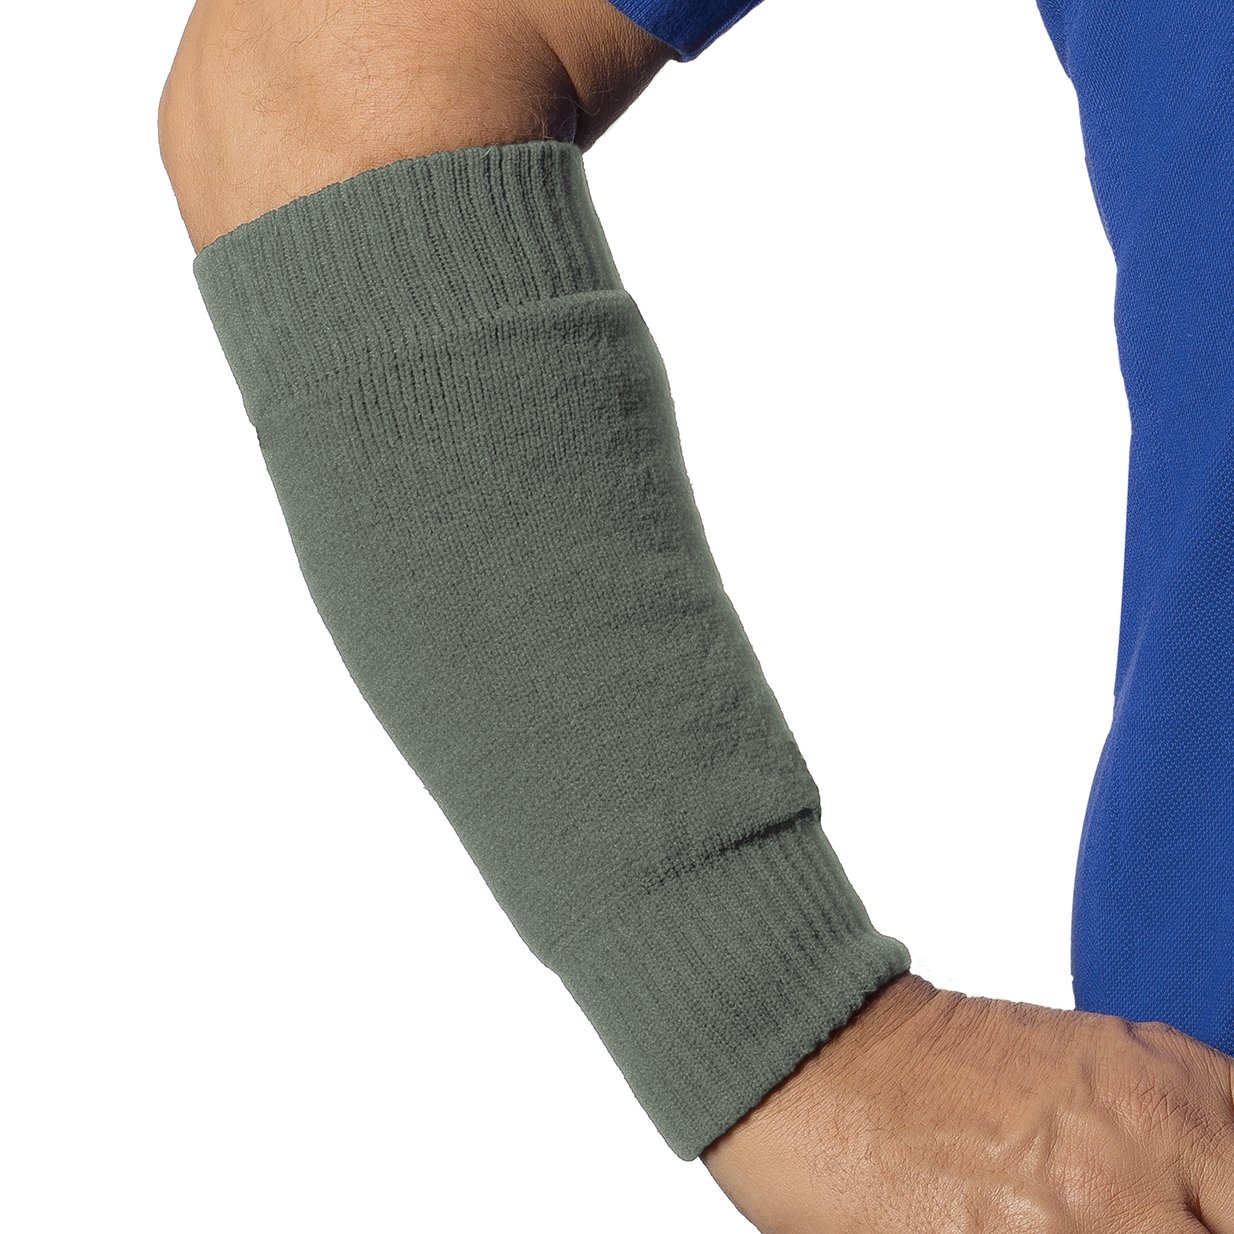 Forearm protectors for thin skin – Light Weight – Protect Frail Skin Olive – Limb Keepers